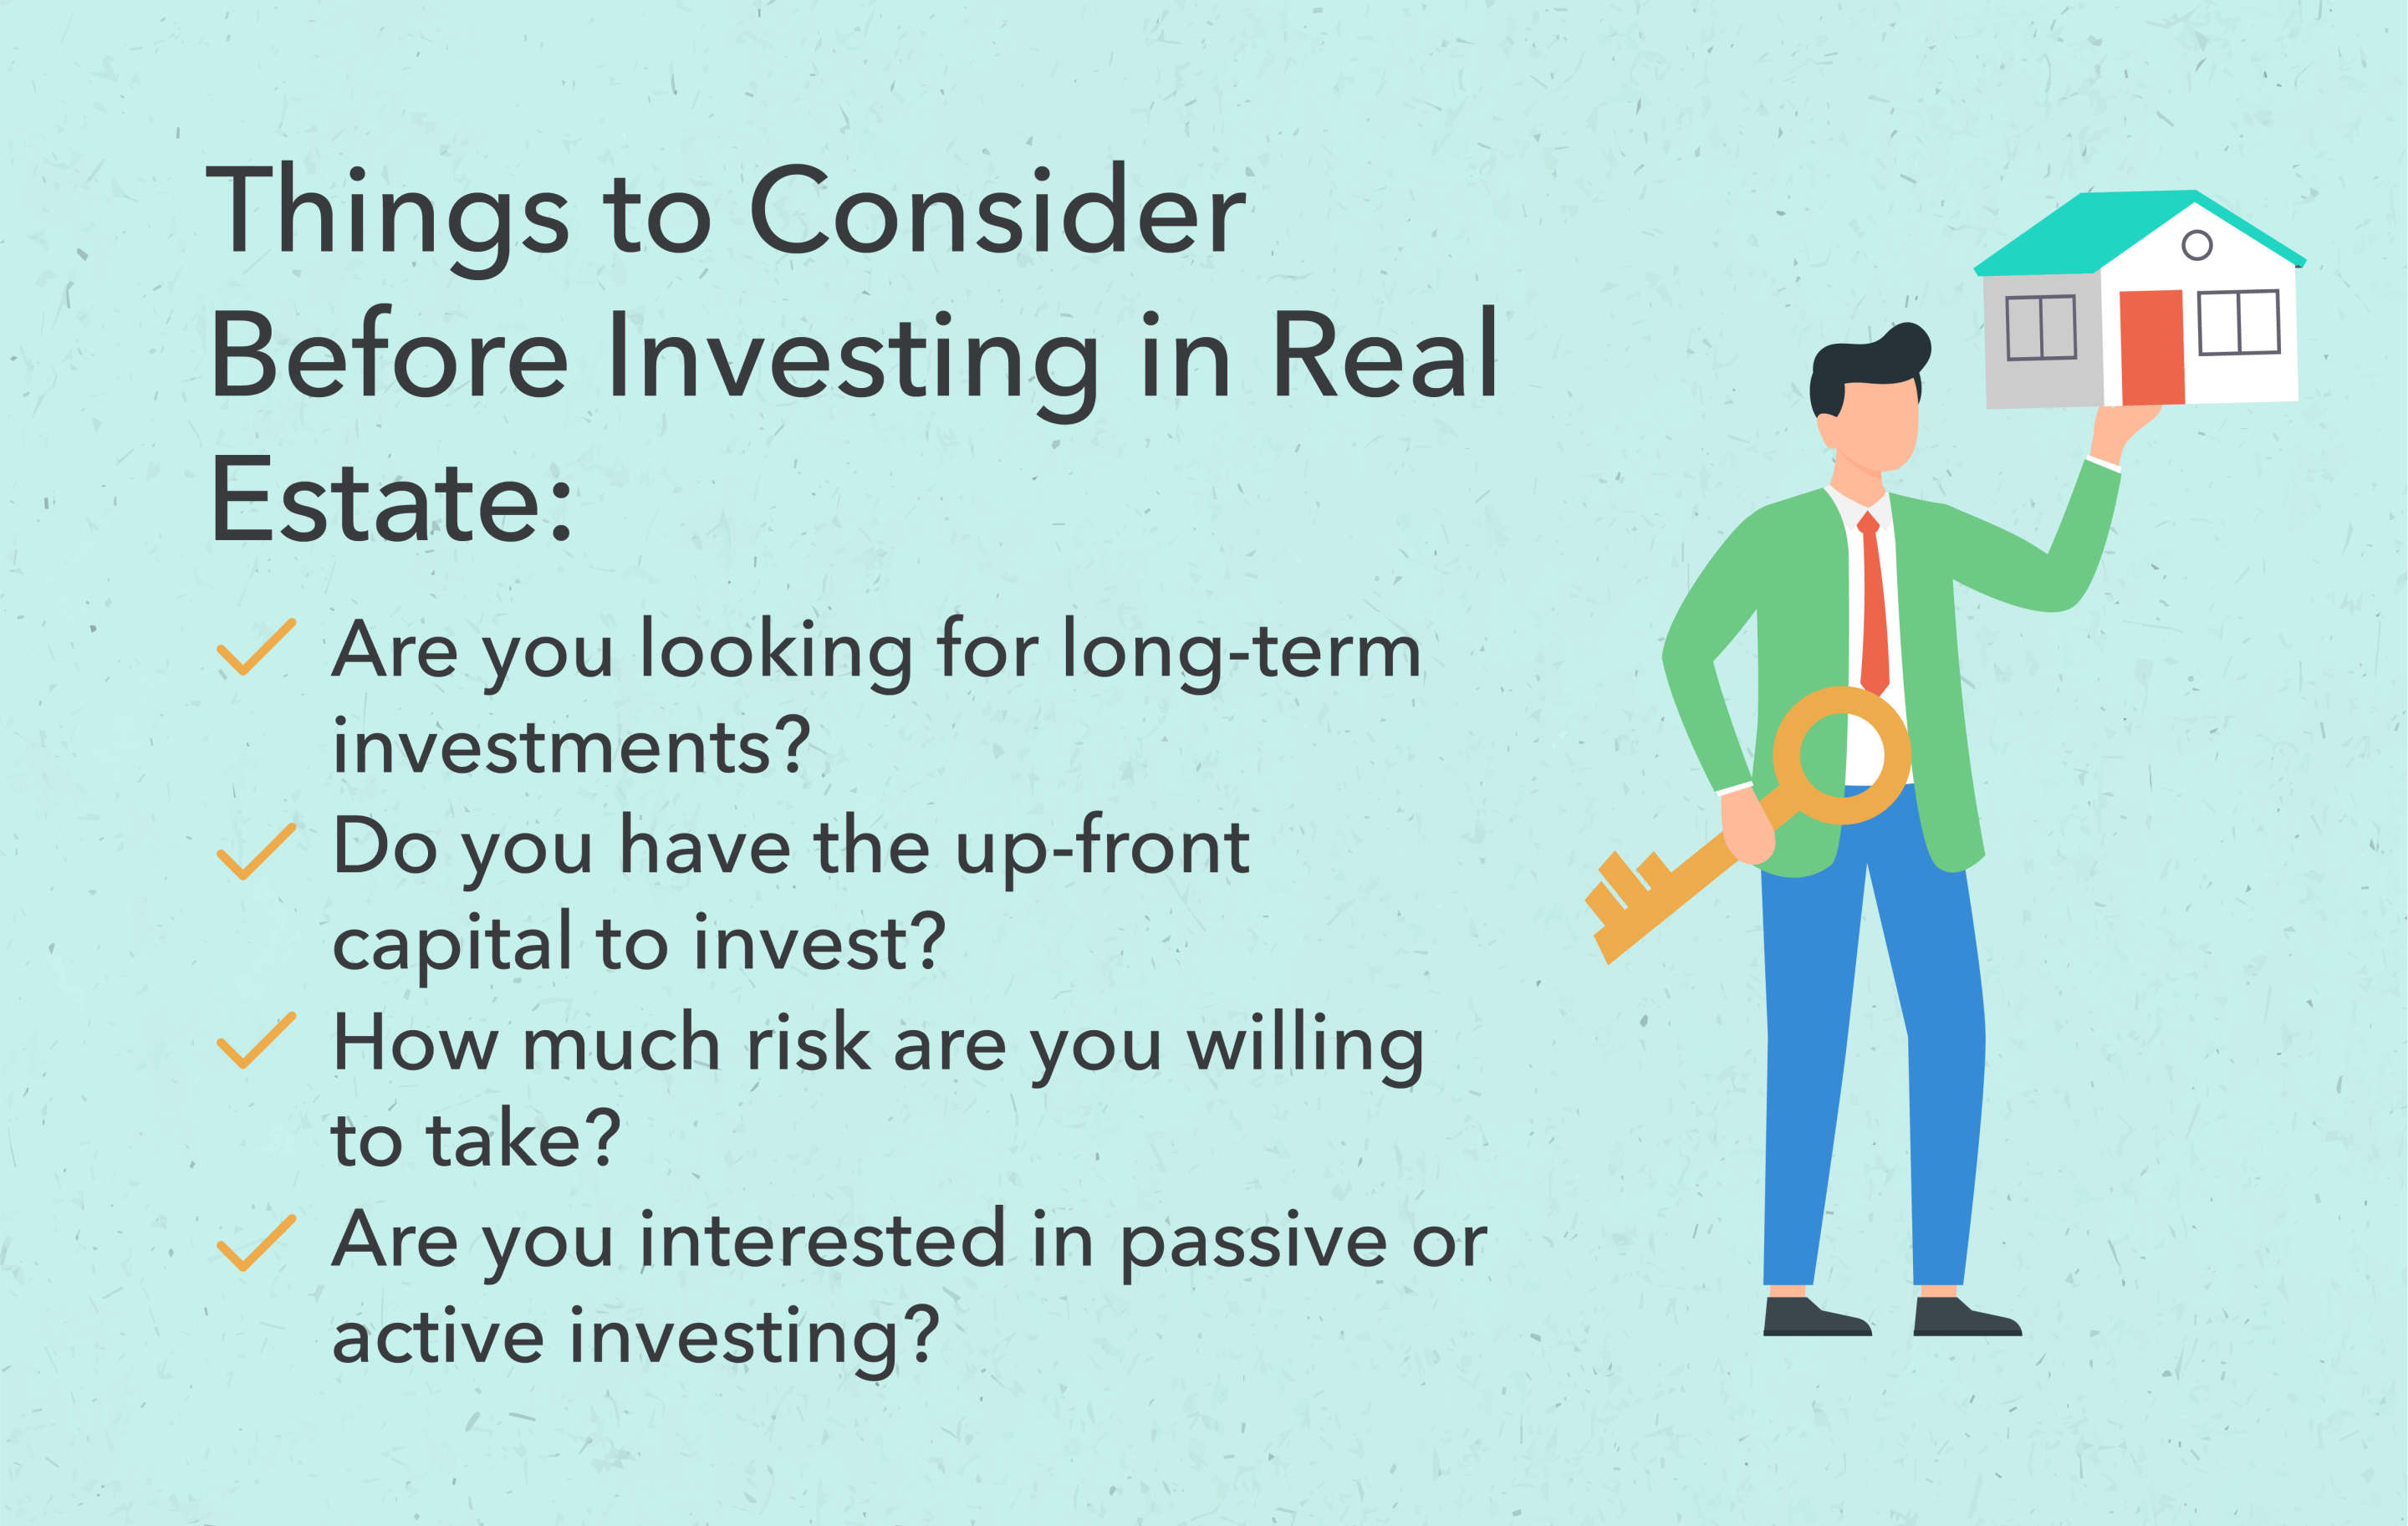 Is Real Estate a Good Investment? X Risks & Benefits to Consider